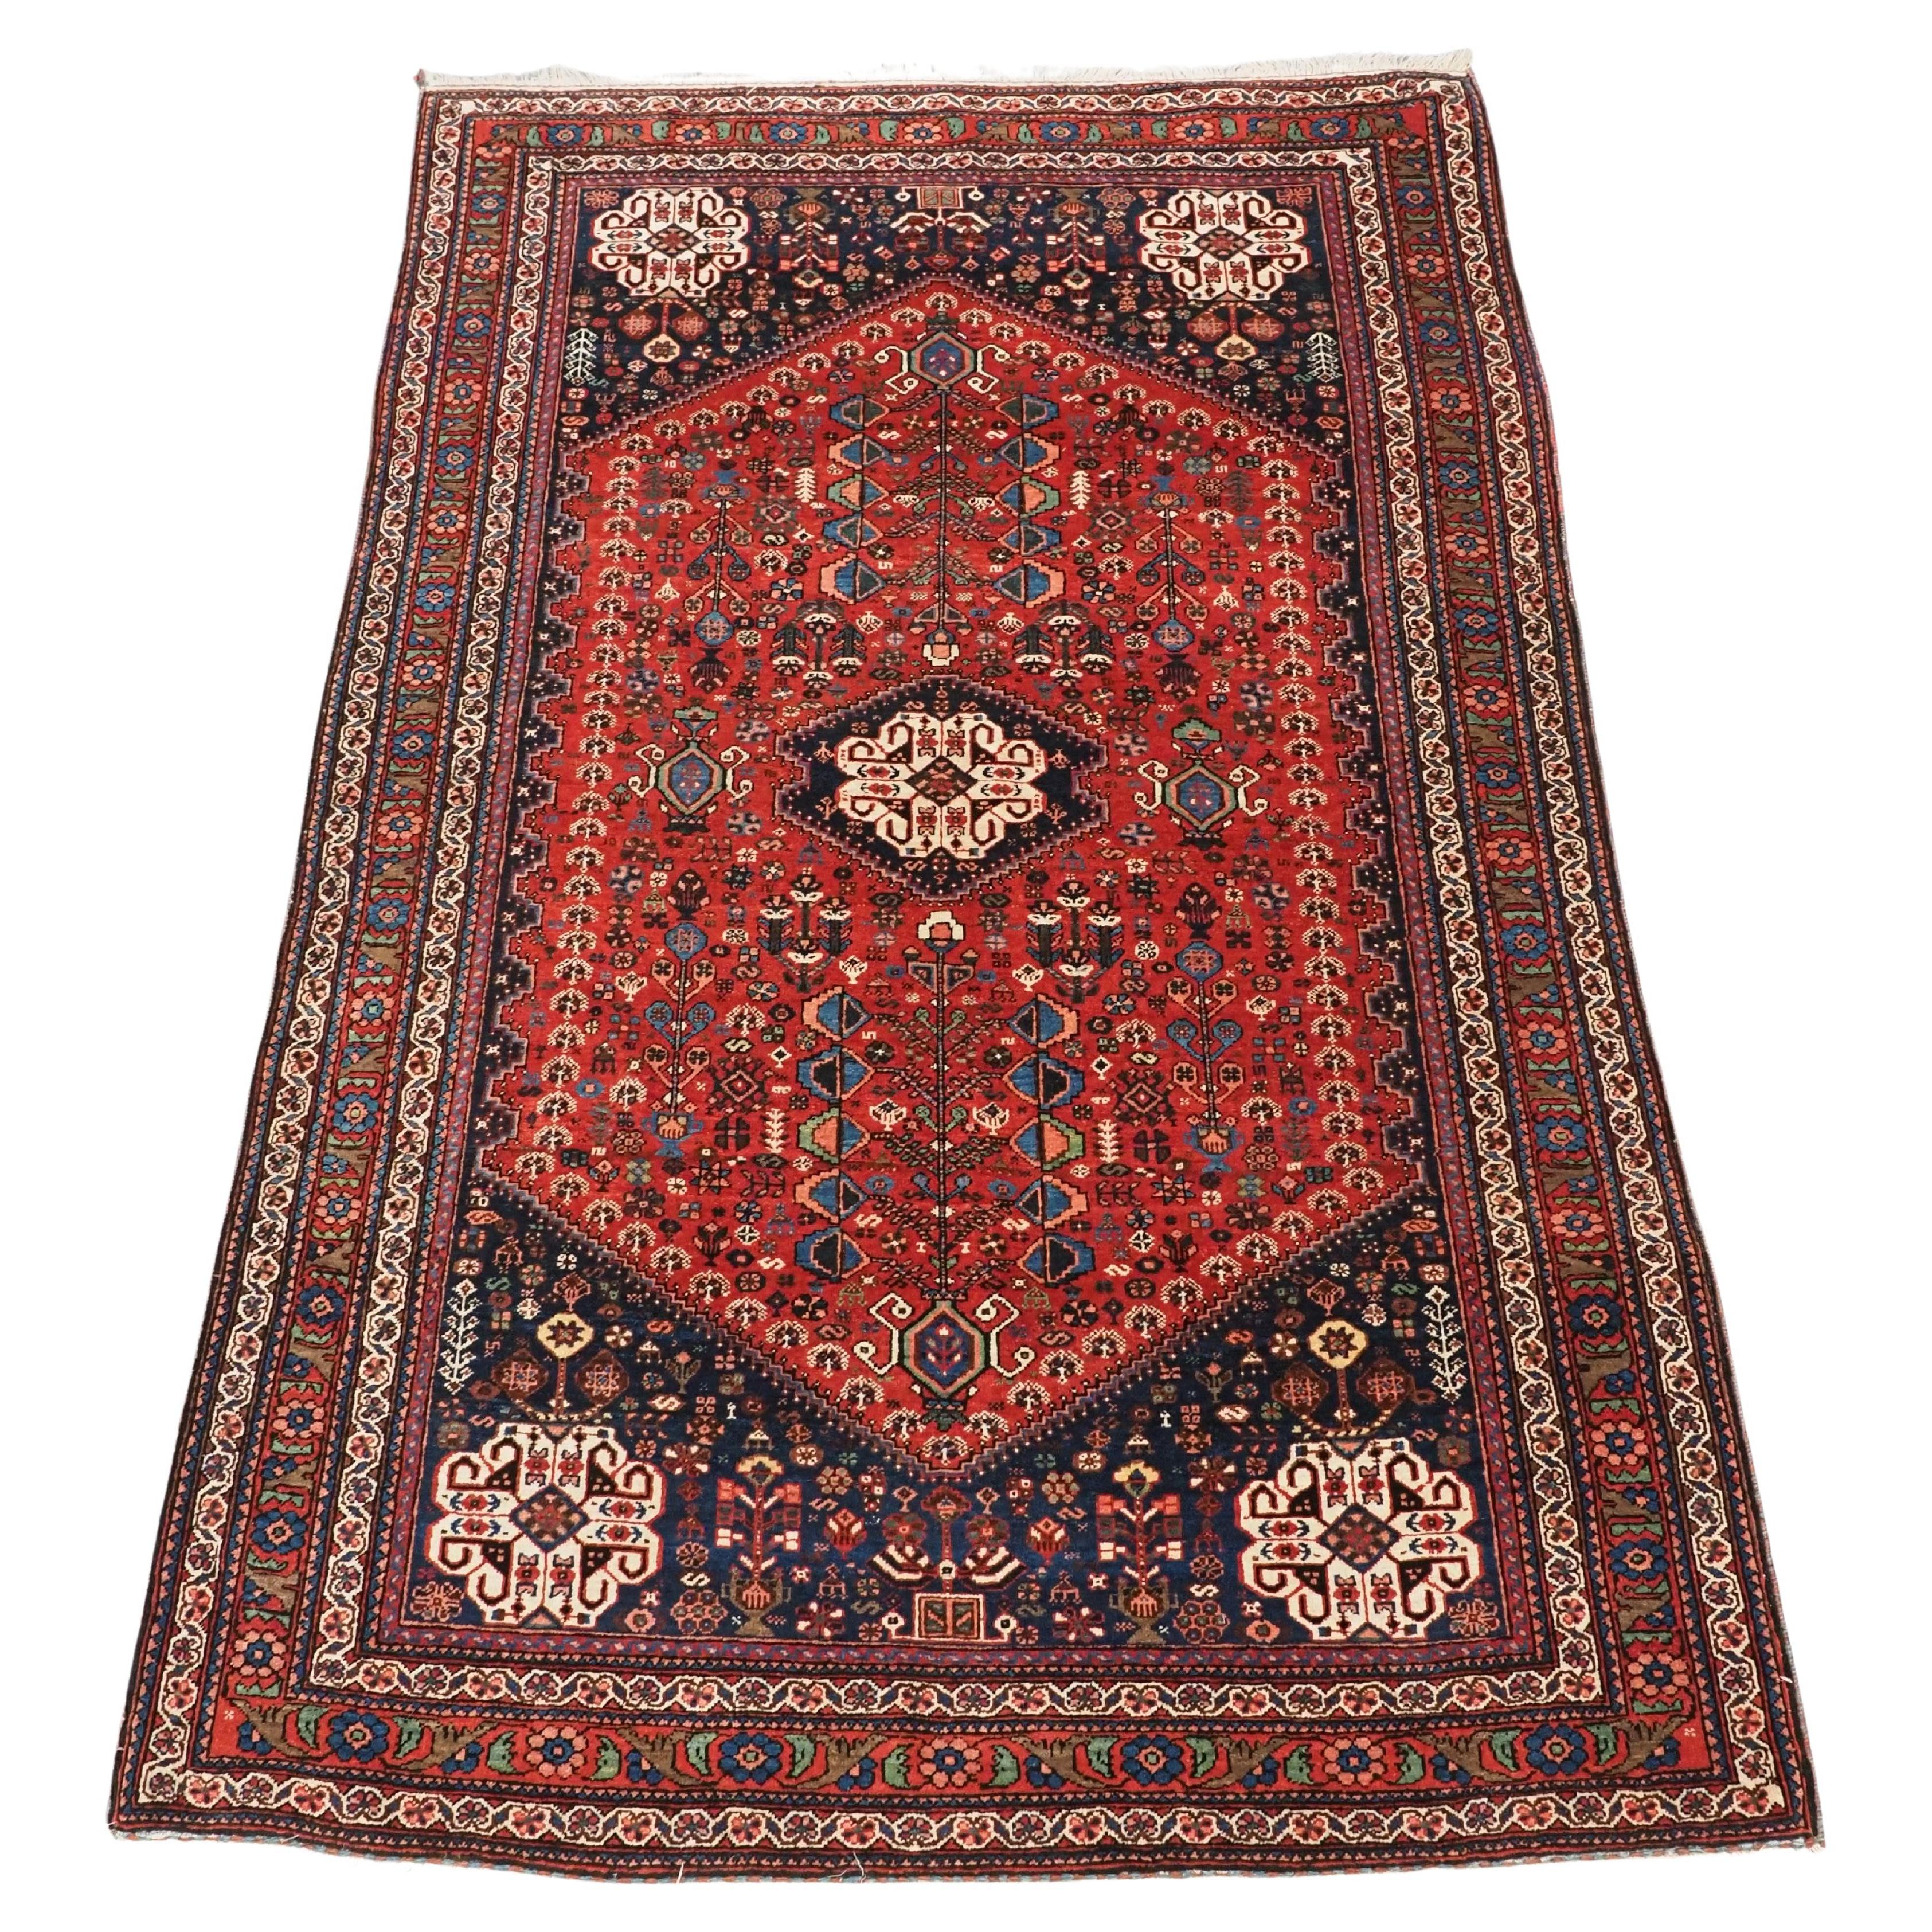 Antique Abedeh rug with the tribal medallion design.  Circa 1900/20.